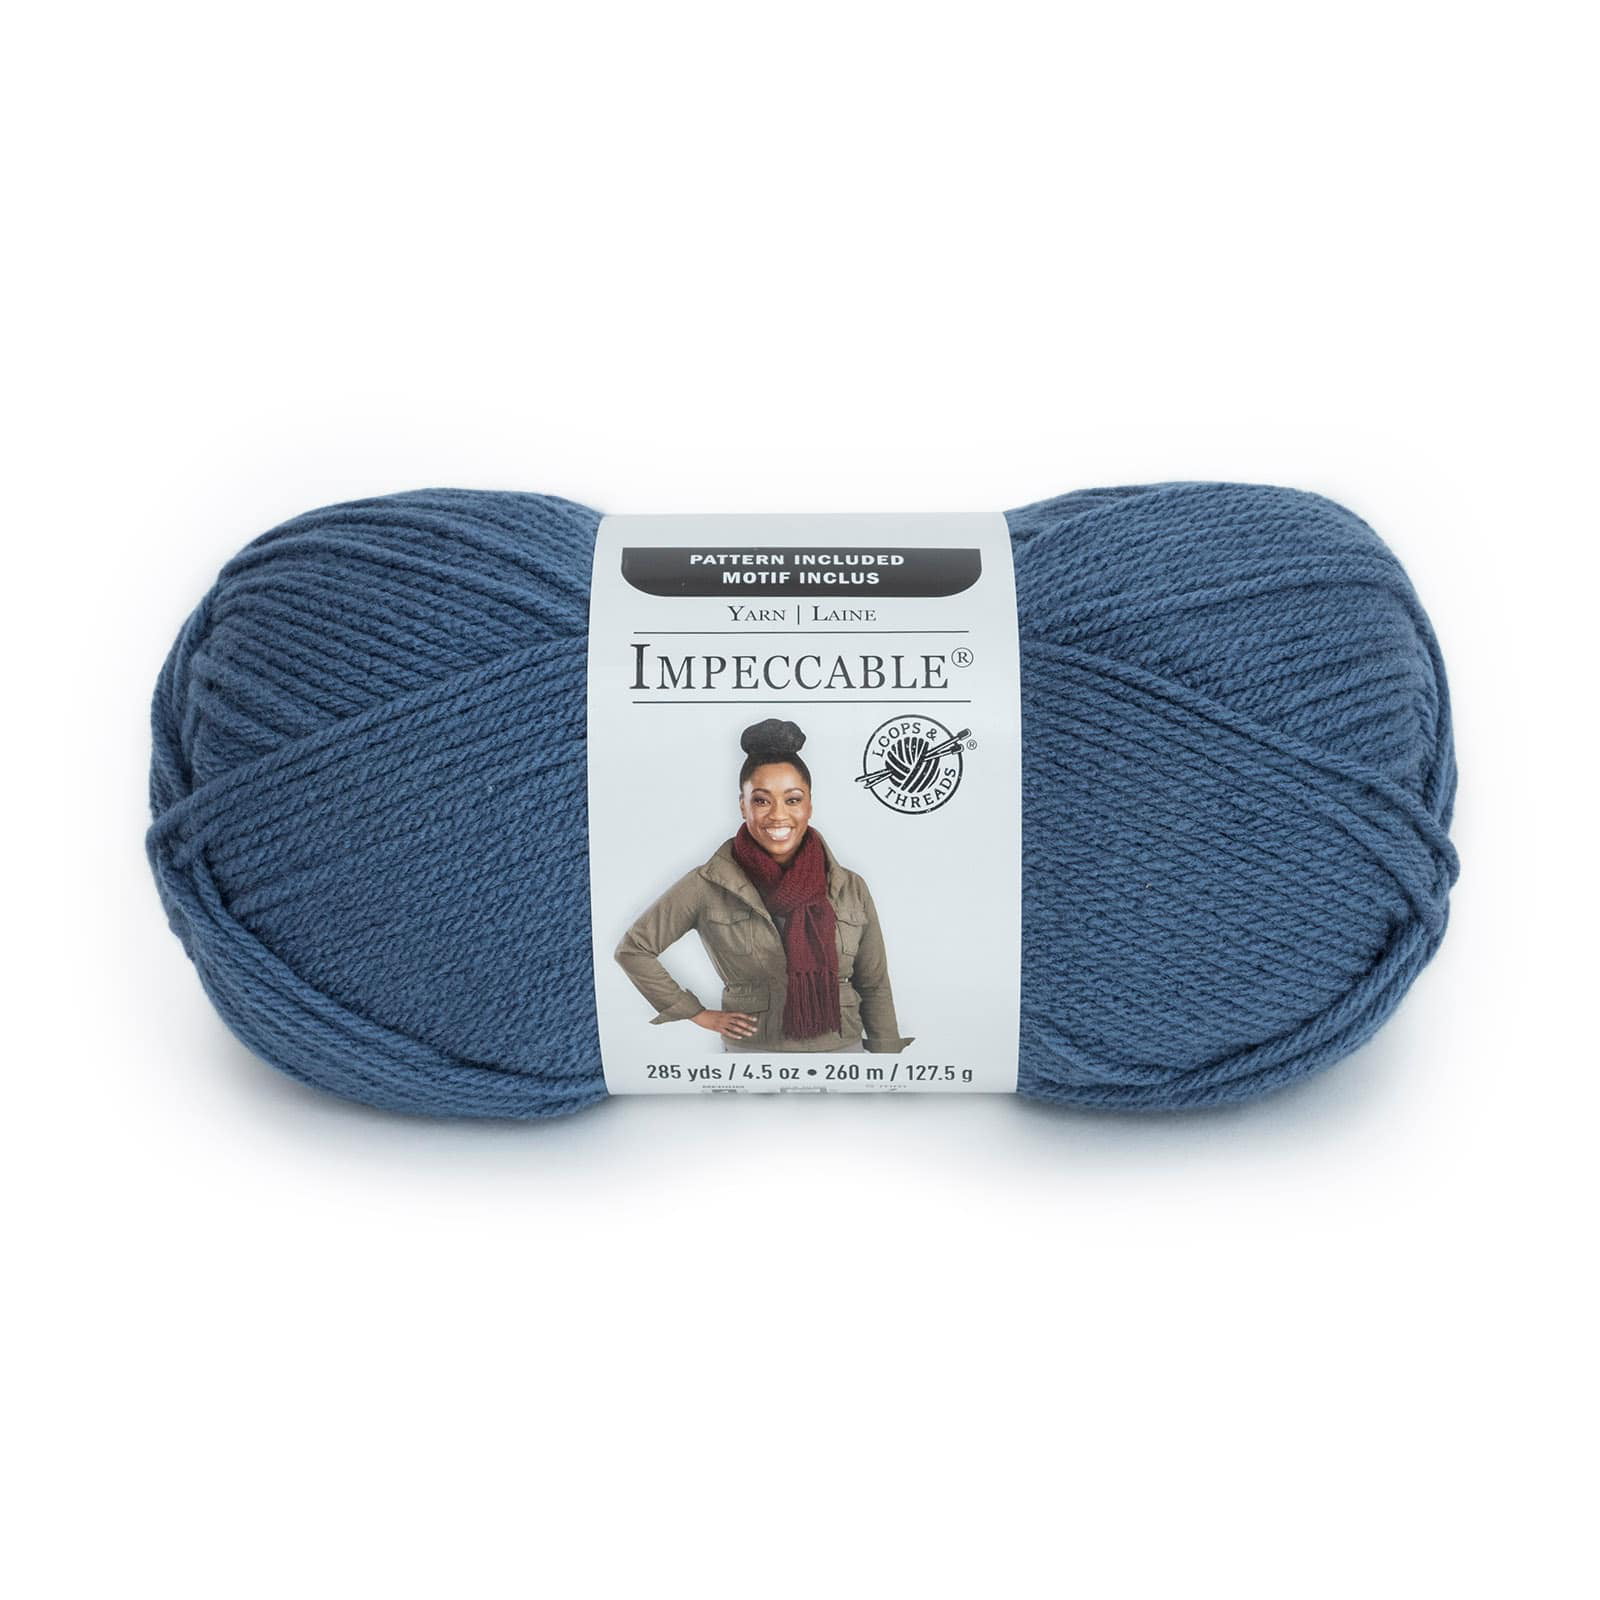 Loops and Threads Impeccable Knitting & Crochet Yarn Color Aran